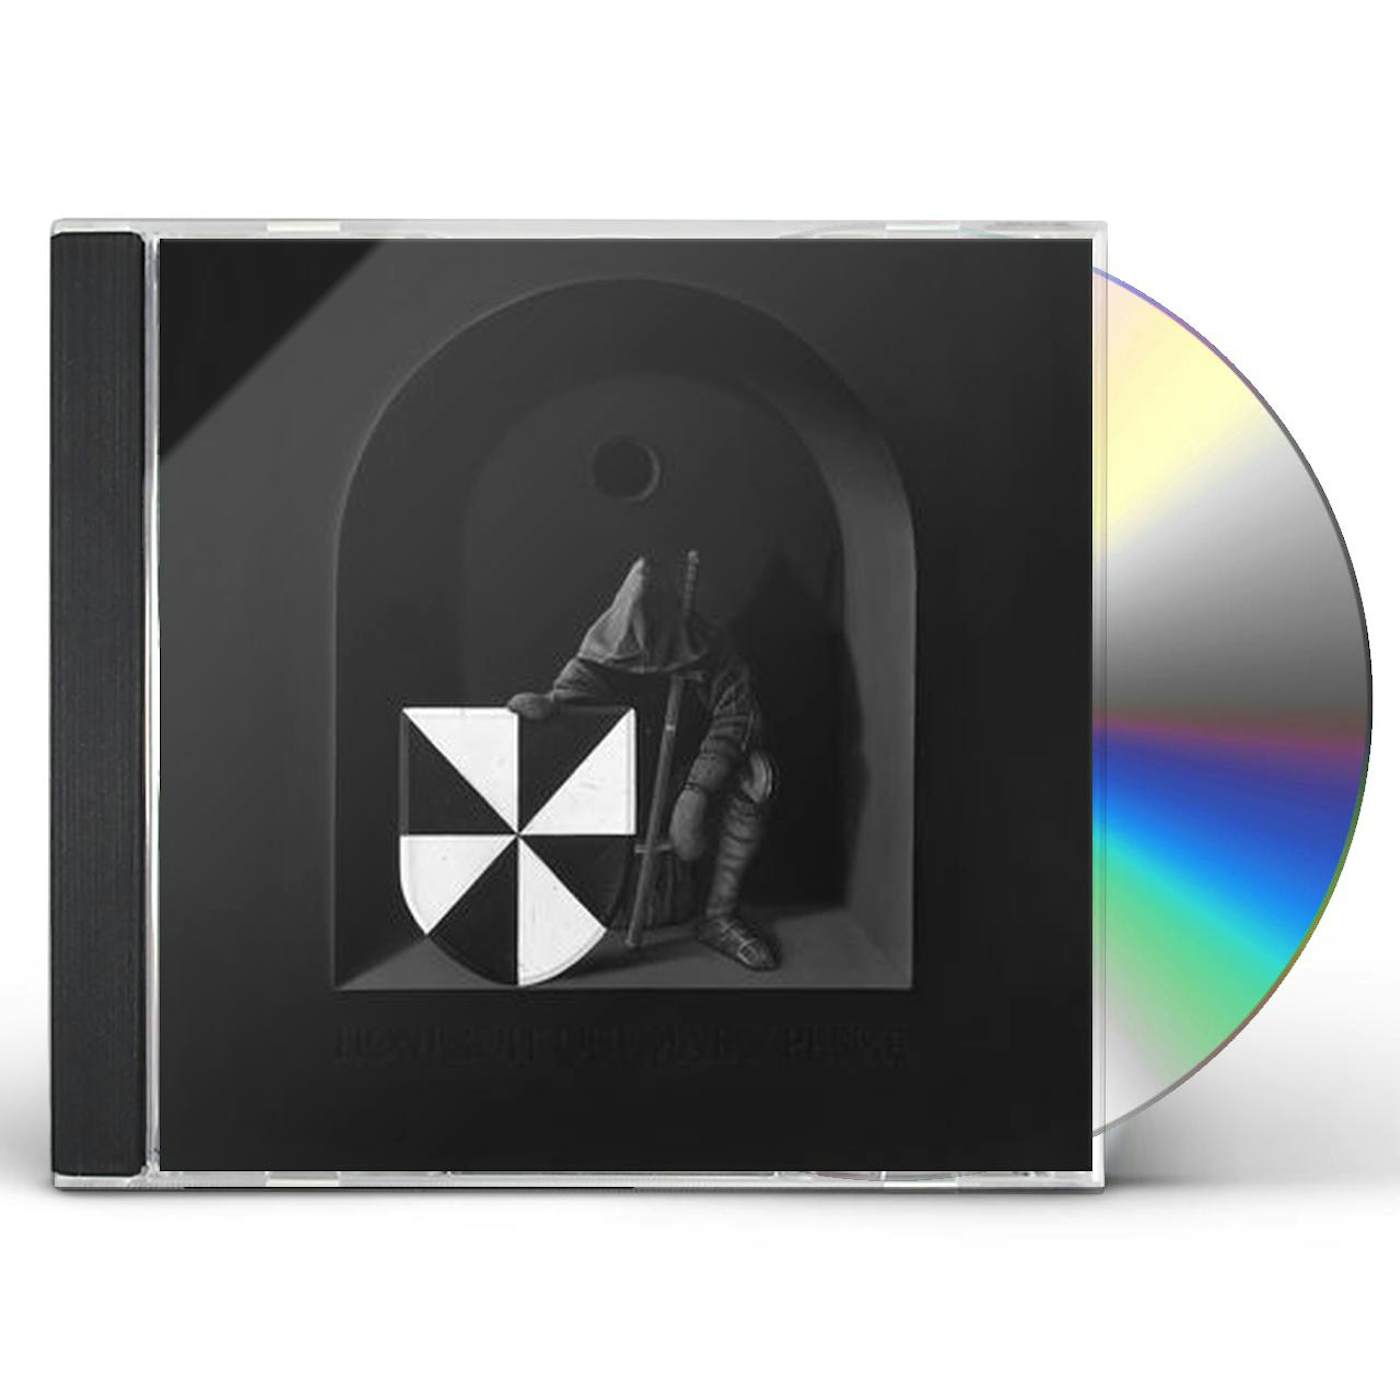 UNKLE ROAD: PART CD - Deluxe Edition